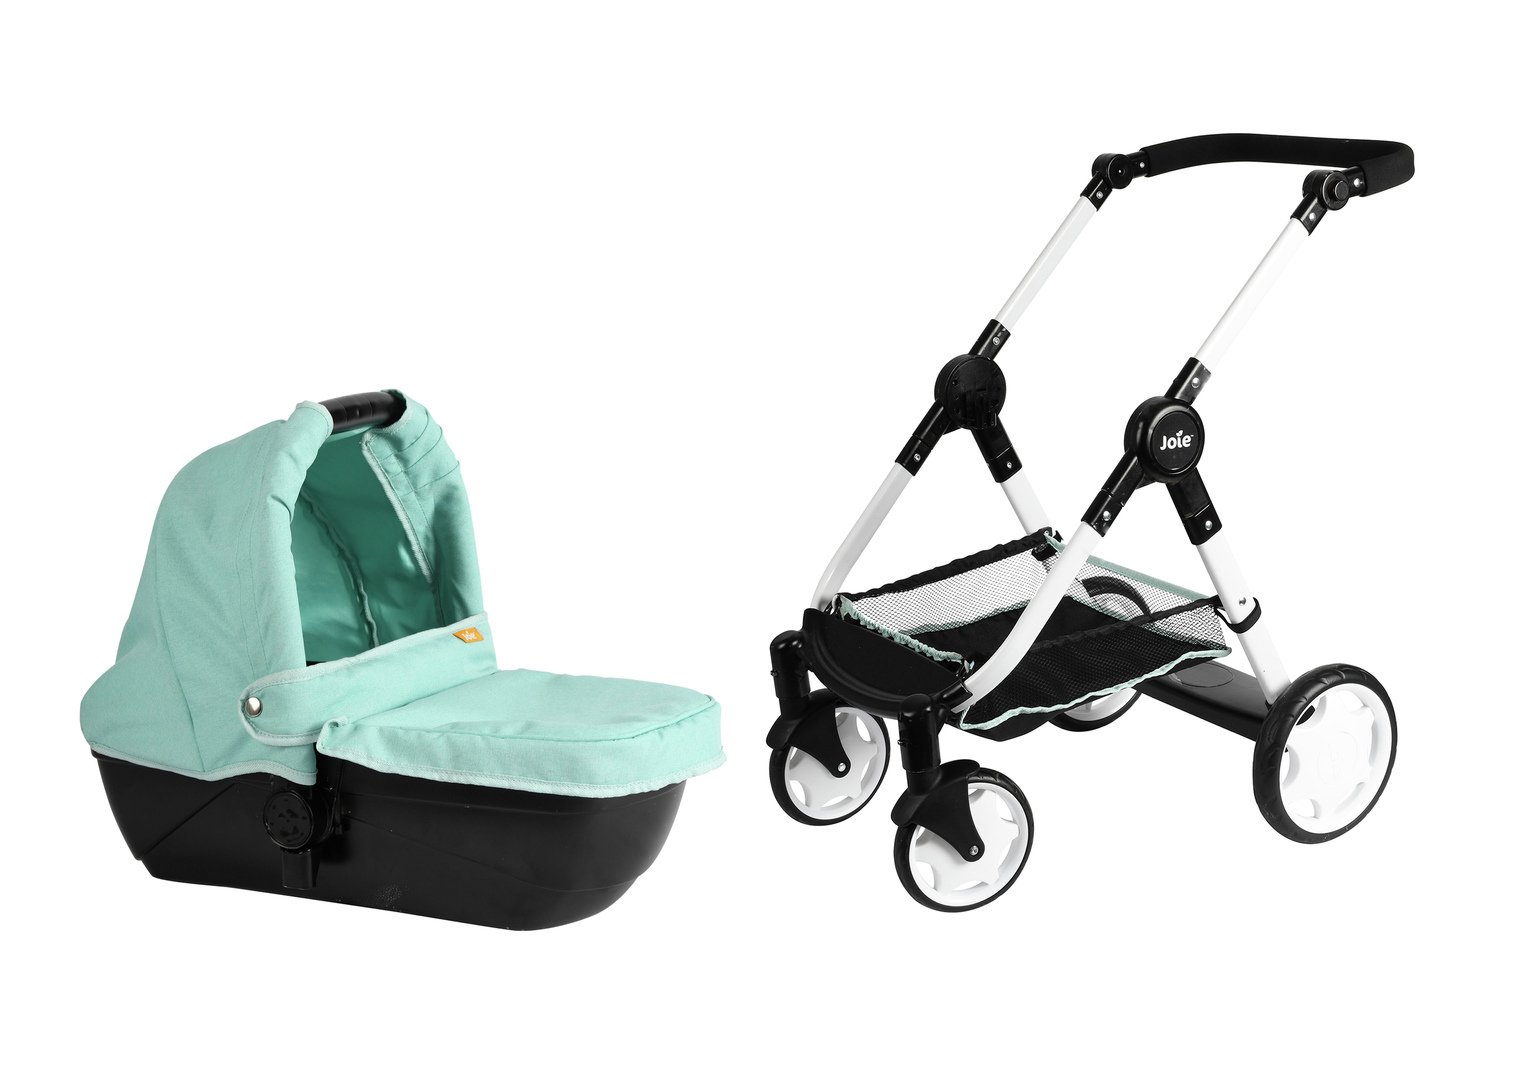 Joie Junior Mytrax Pram Review